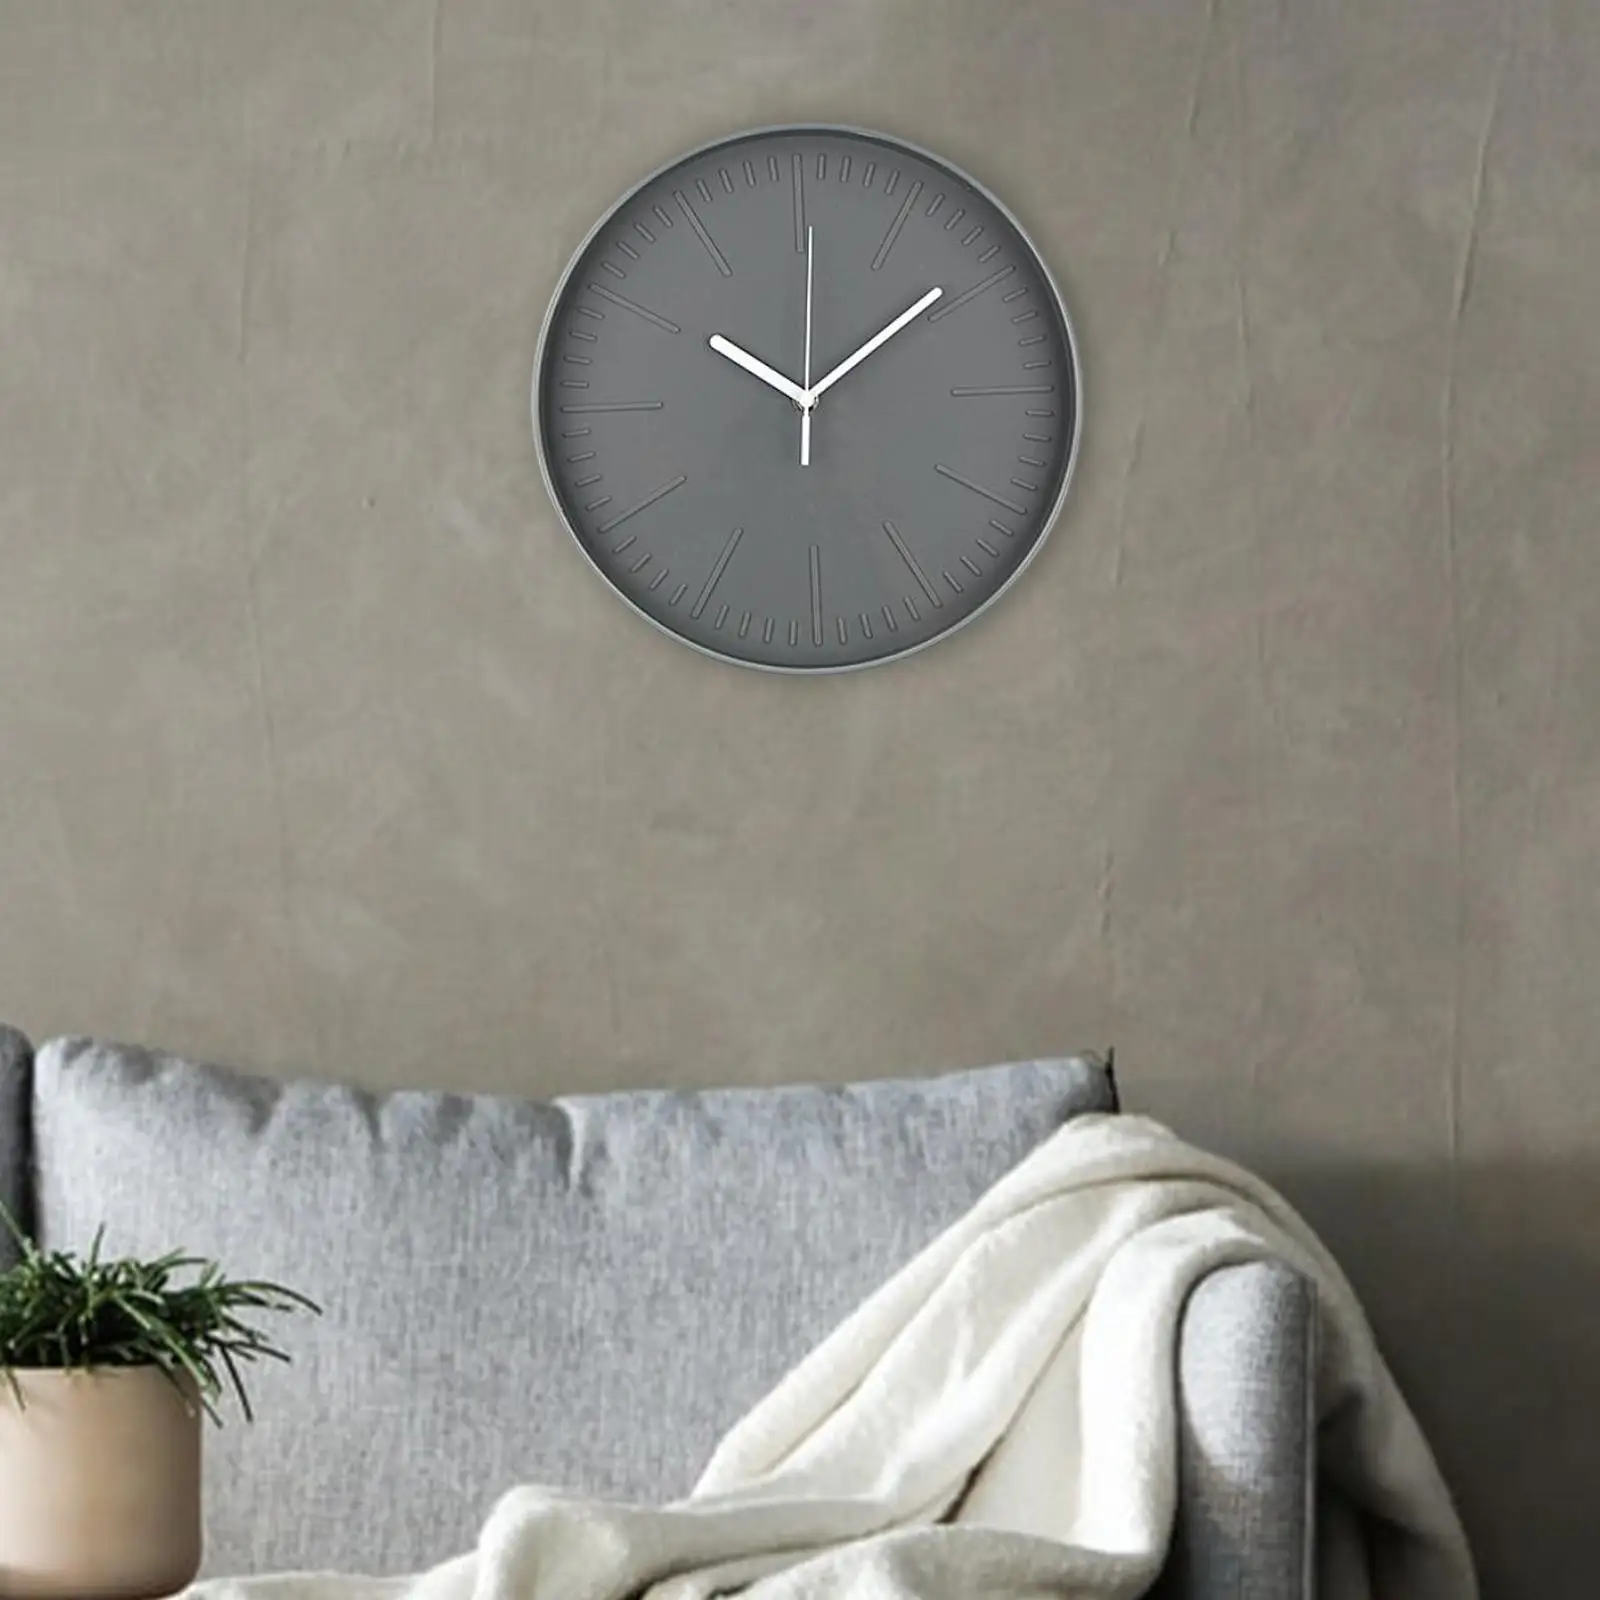 Round Hanging Clocks Silent Decors Decorative Watches 12inch Wall Clock for Kitchen Living Room Bedroom Kids Room Home